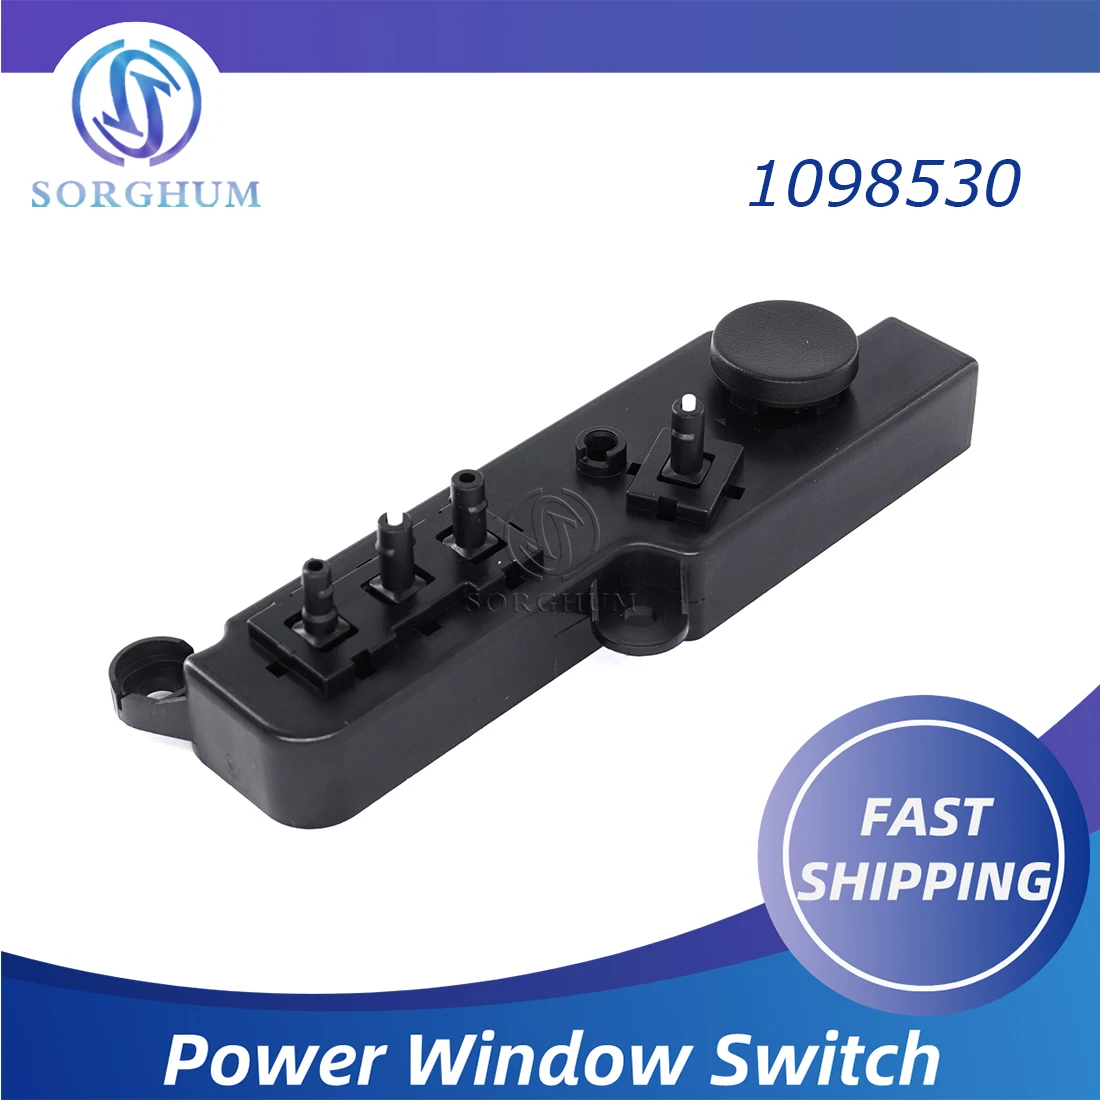 

Sorghum 1098530 Front Right Power Seat Adjustment Switch Regulator For Tesla Model 3 2017 2018 2019 2020 Car Accessories